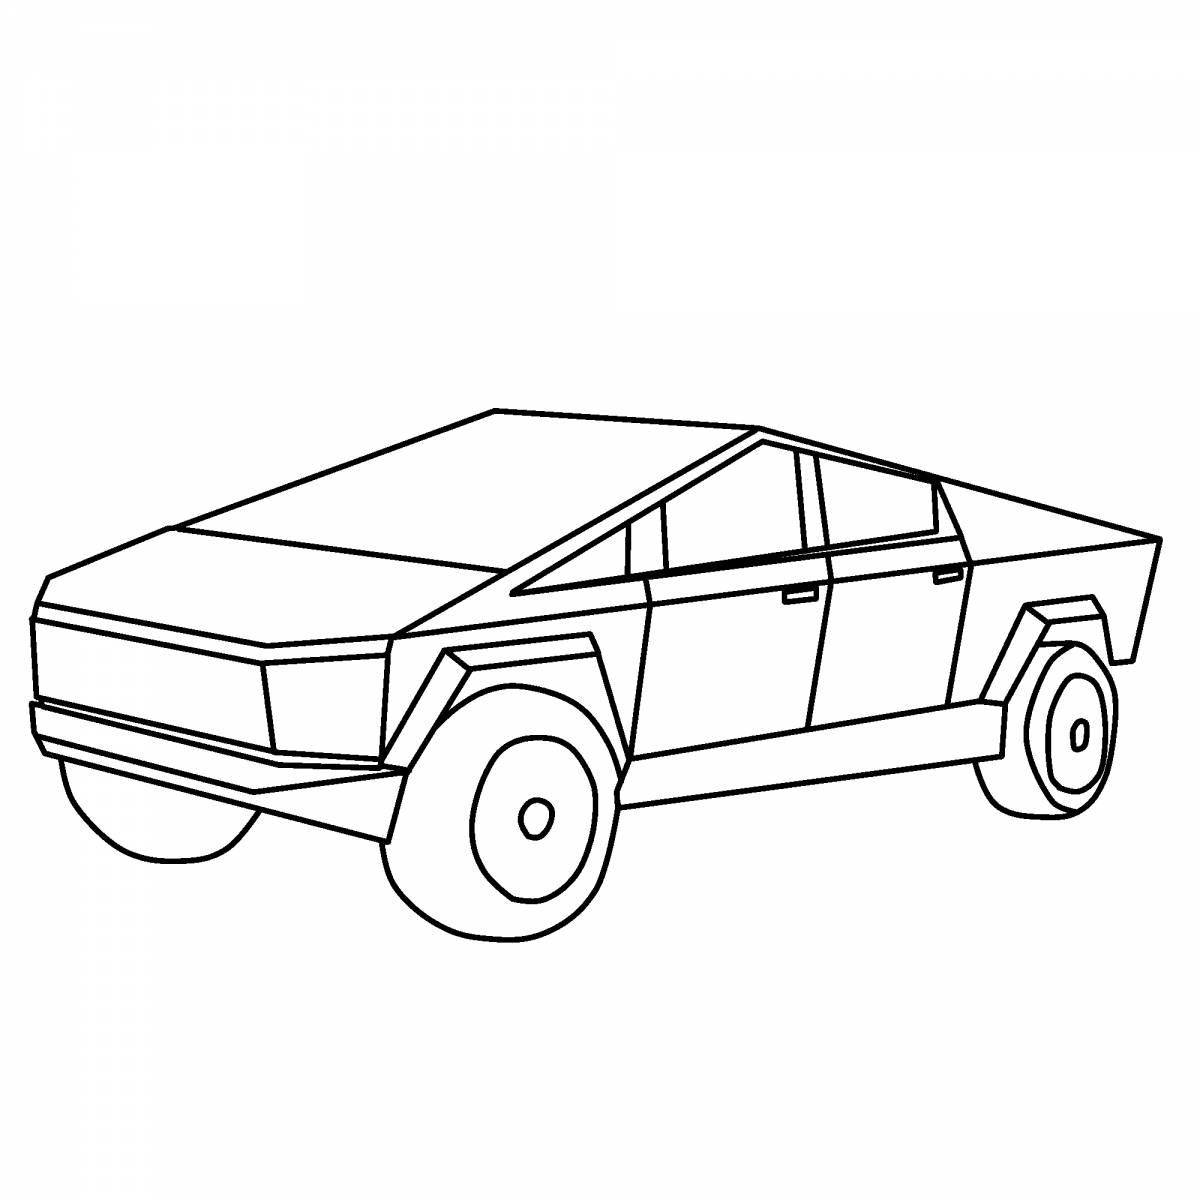 Vibrant cyber truck coloring page